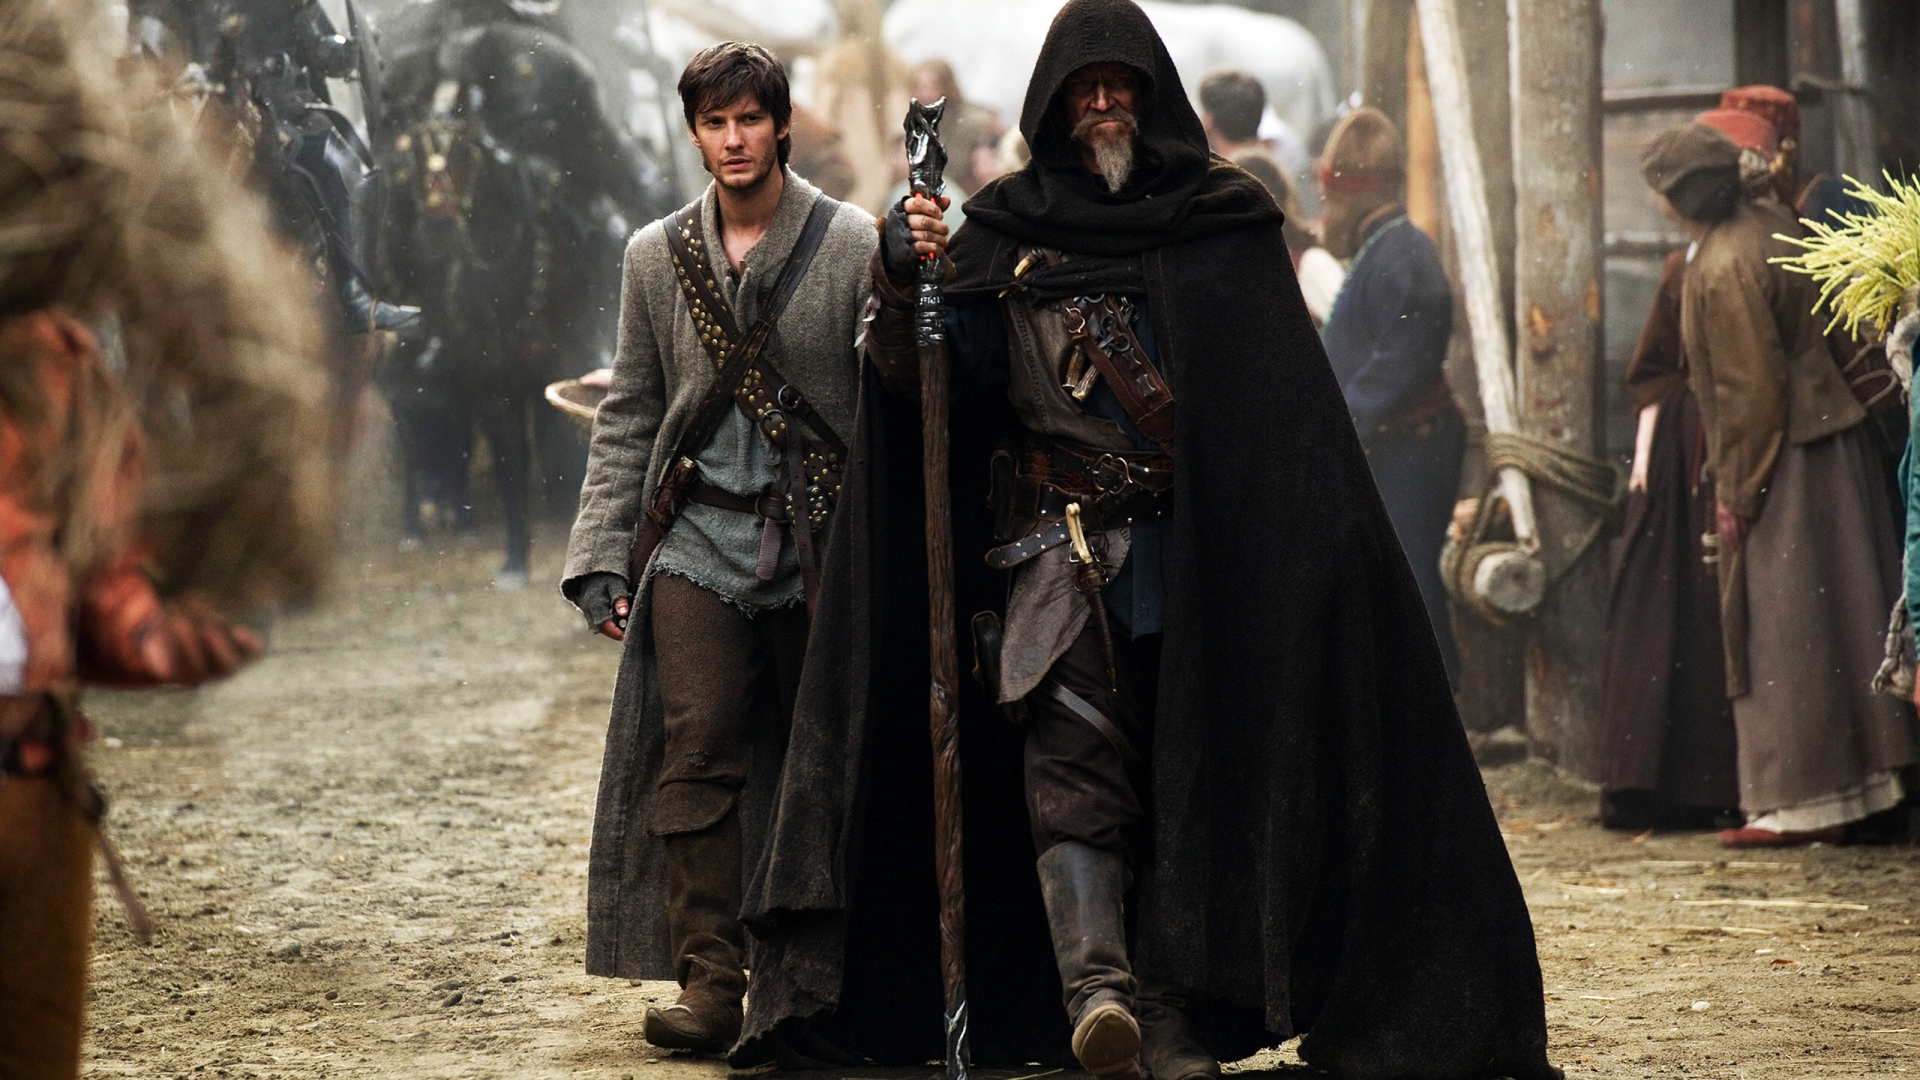 The Seventh Son Movie 2013 for 1920 x 1080 HDTV 1080p resolution